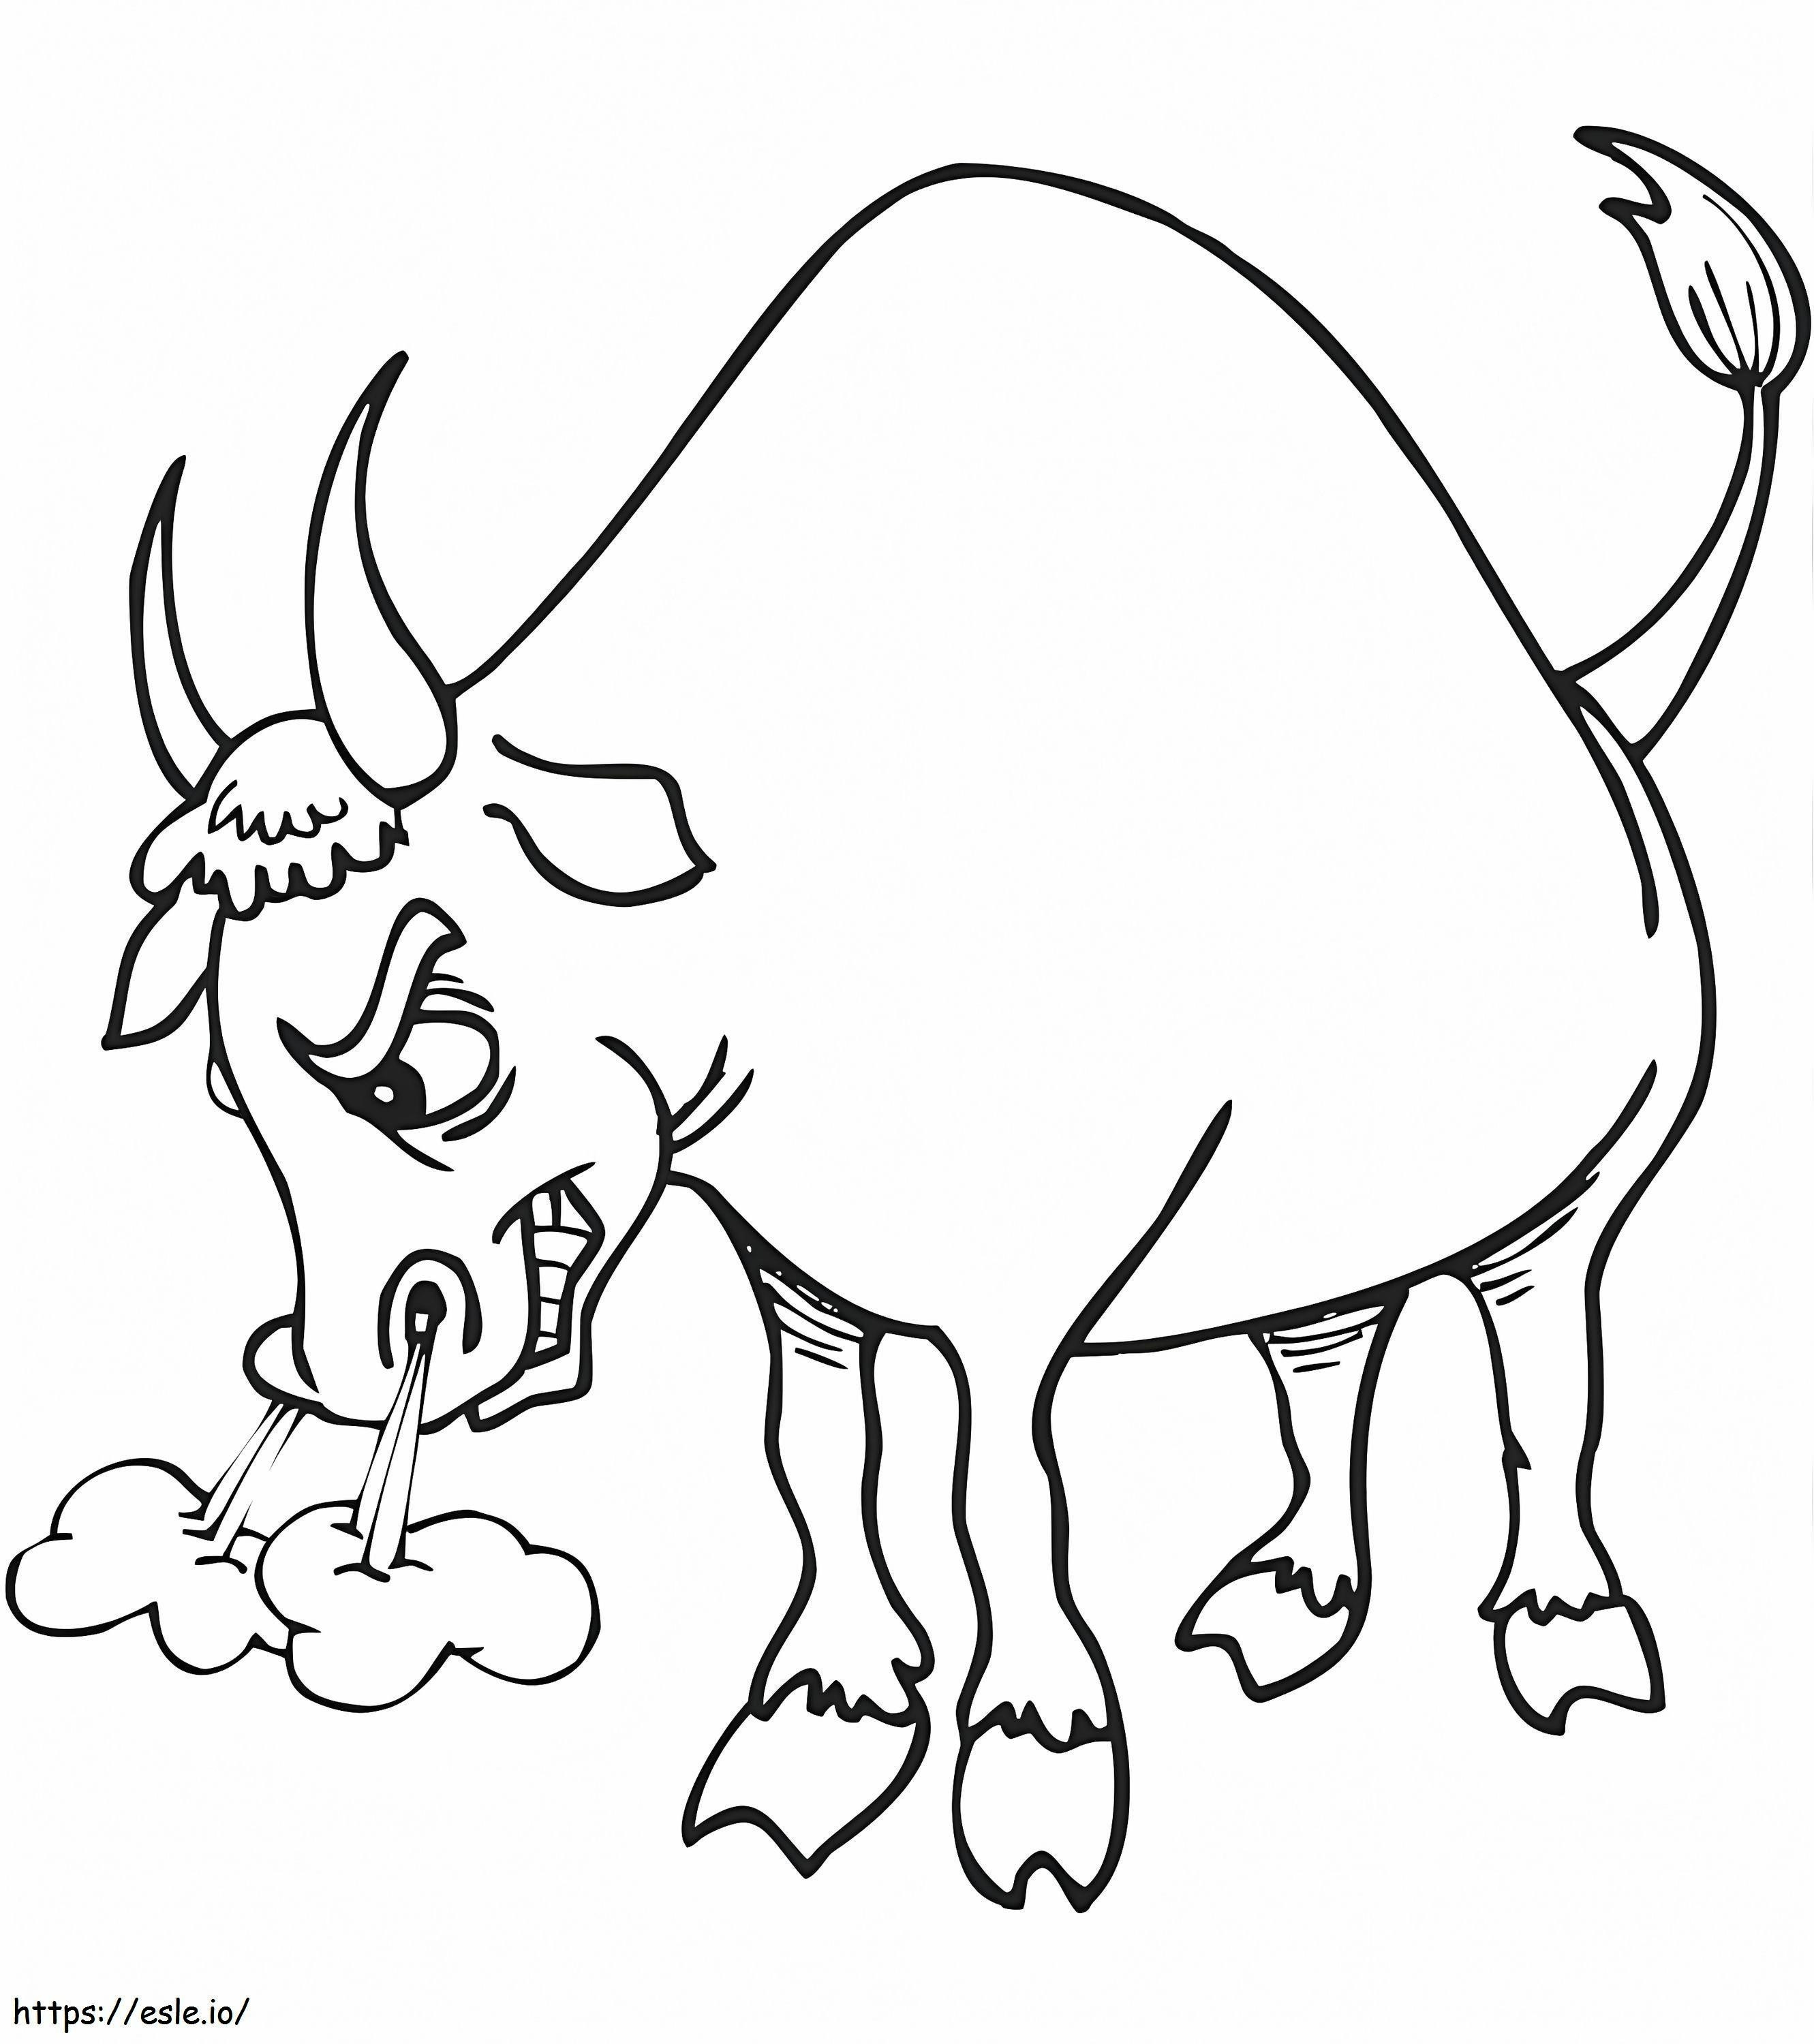 Free Angry Bull coloring page